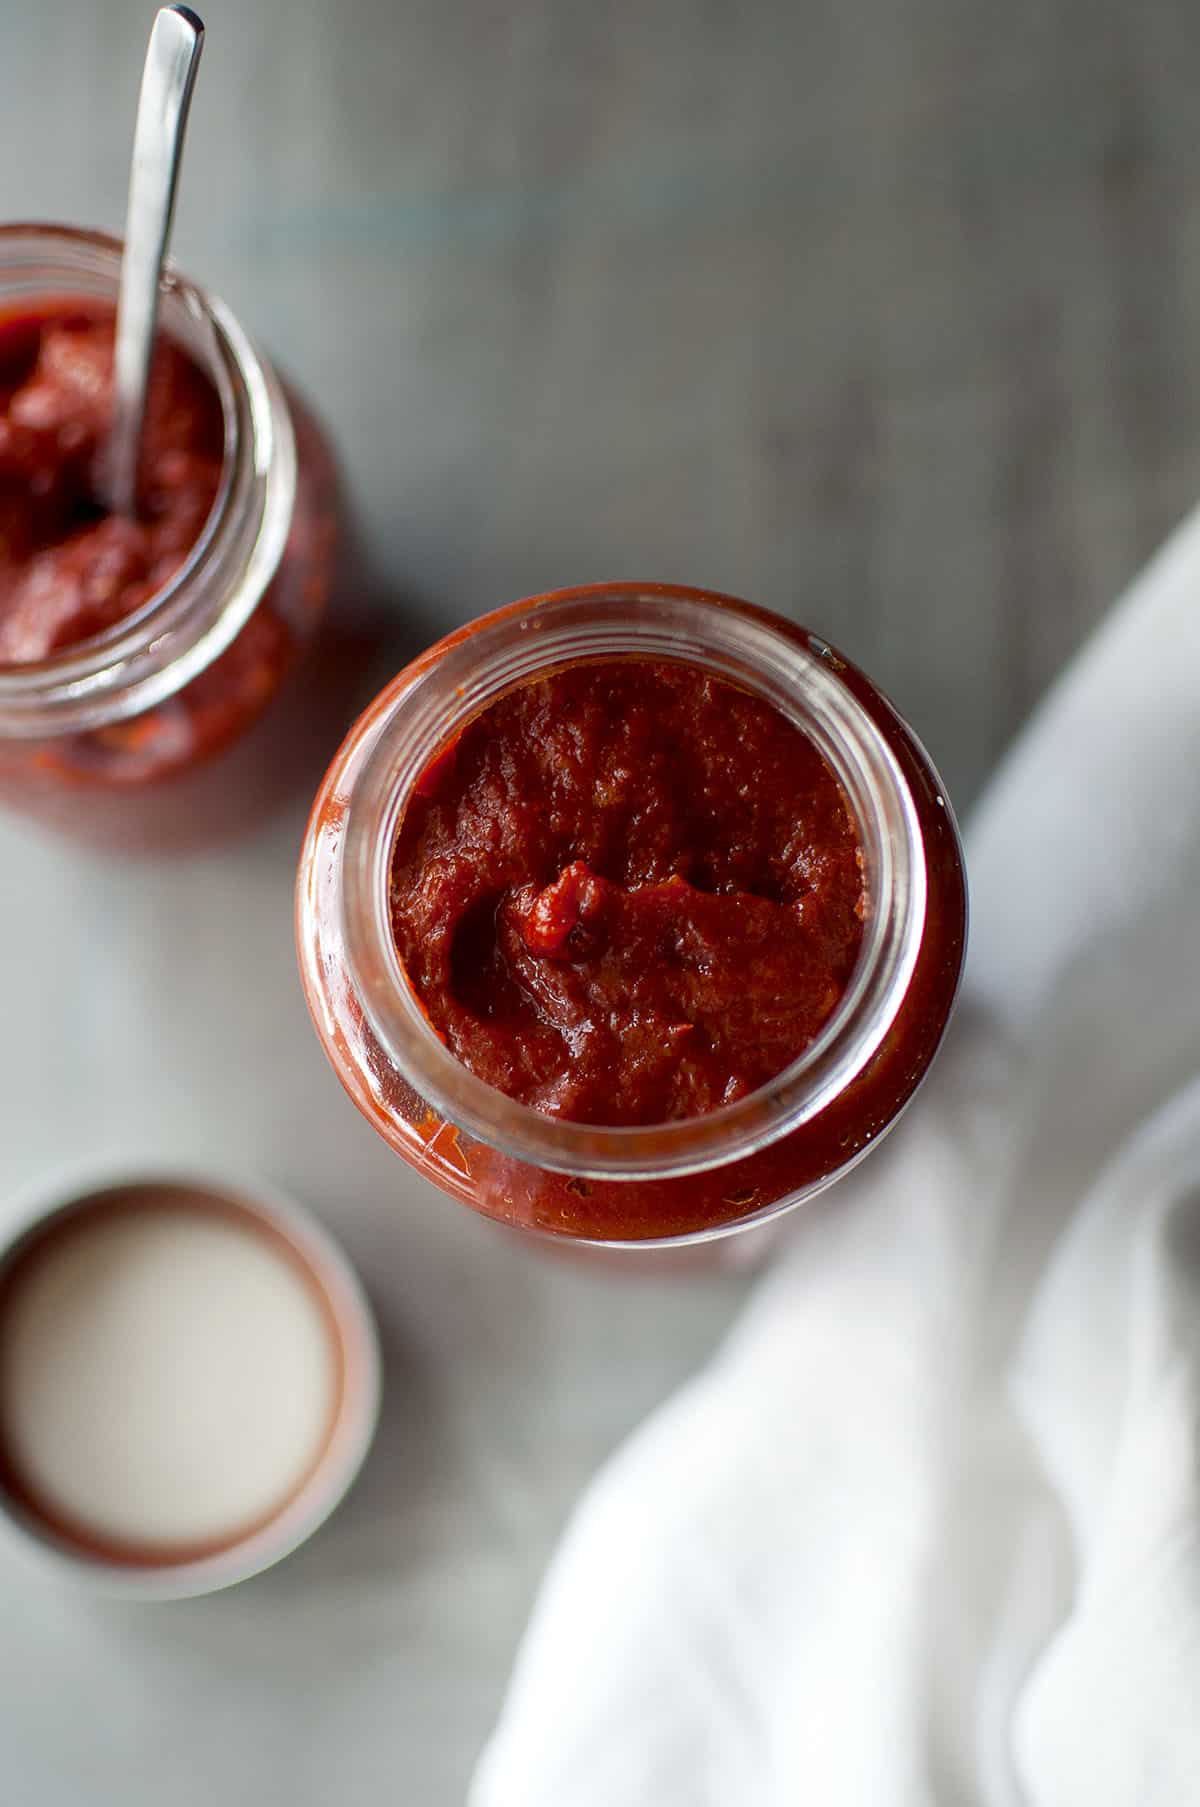 Top view of a glass jar with the spicy tomato concentrate